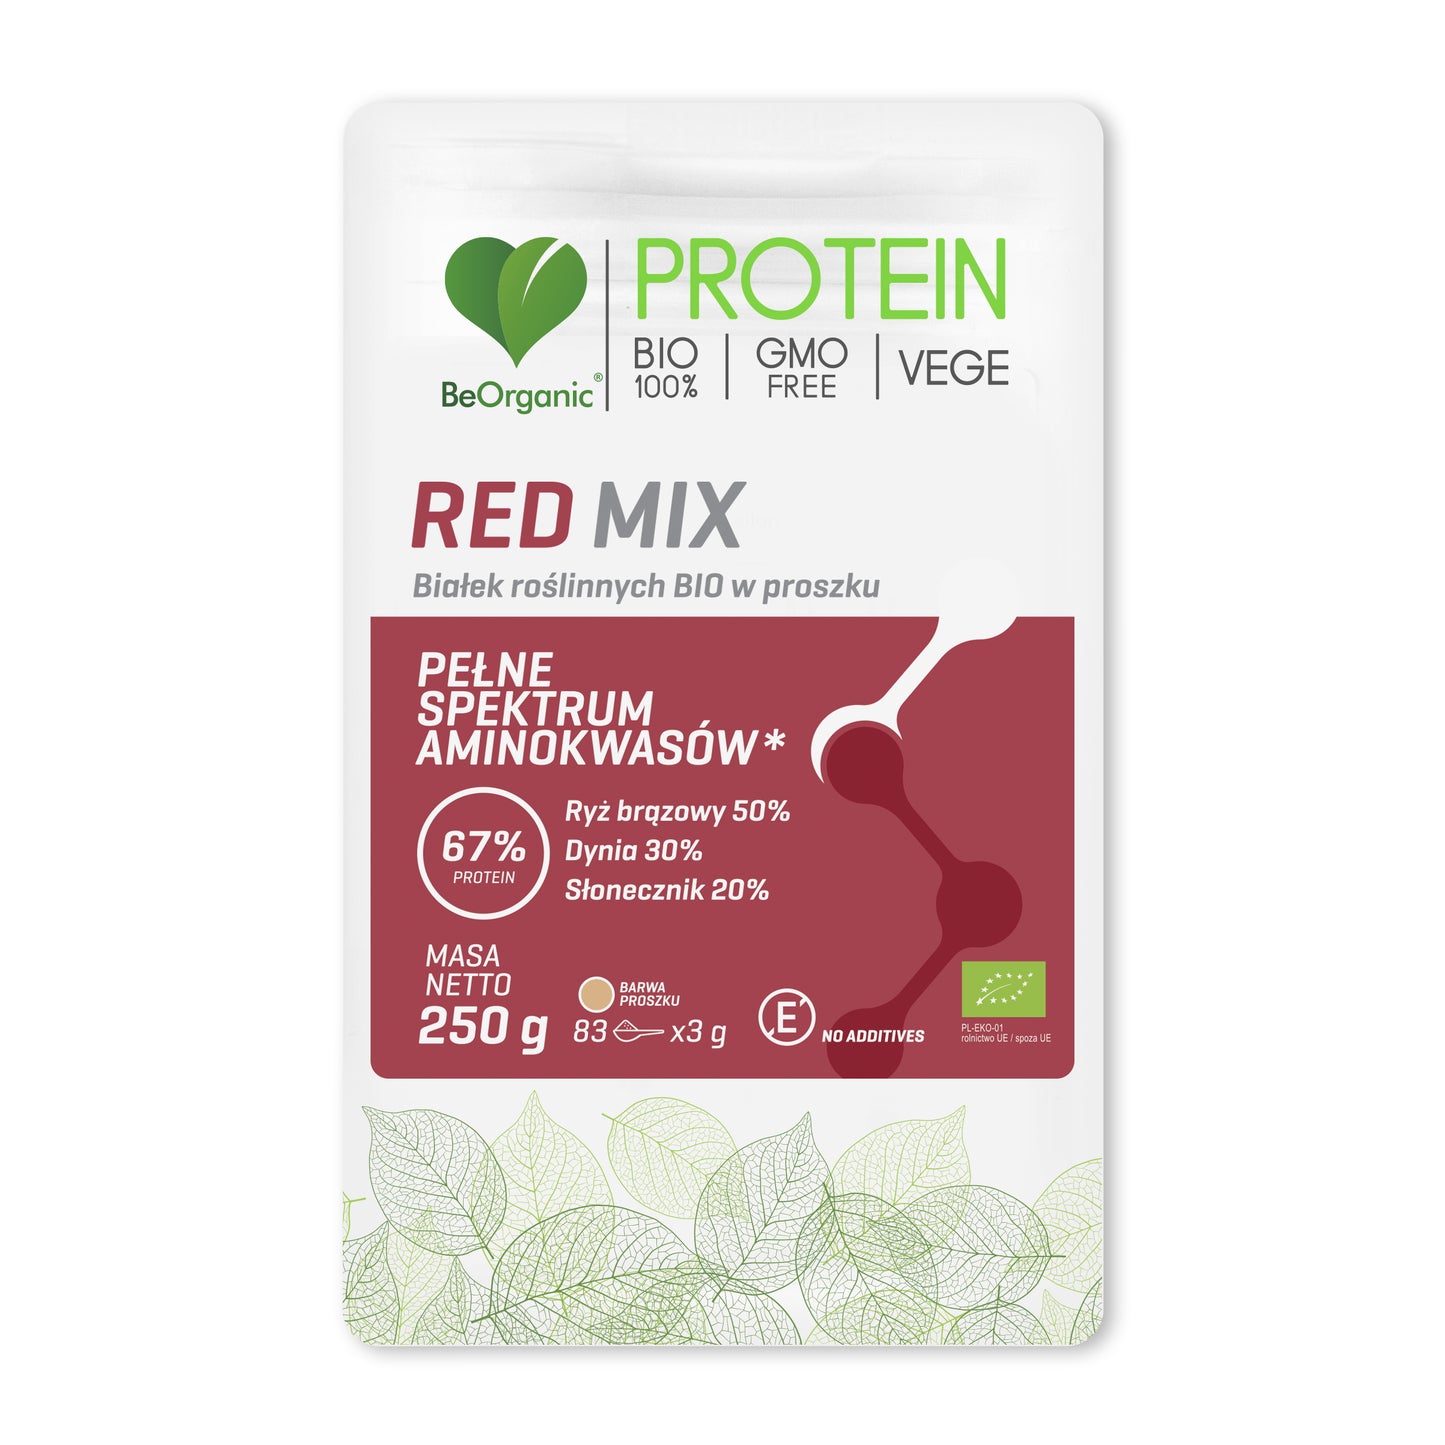 BeOrganic Red MIX vegetable protein, 250g